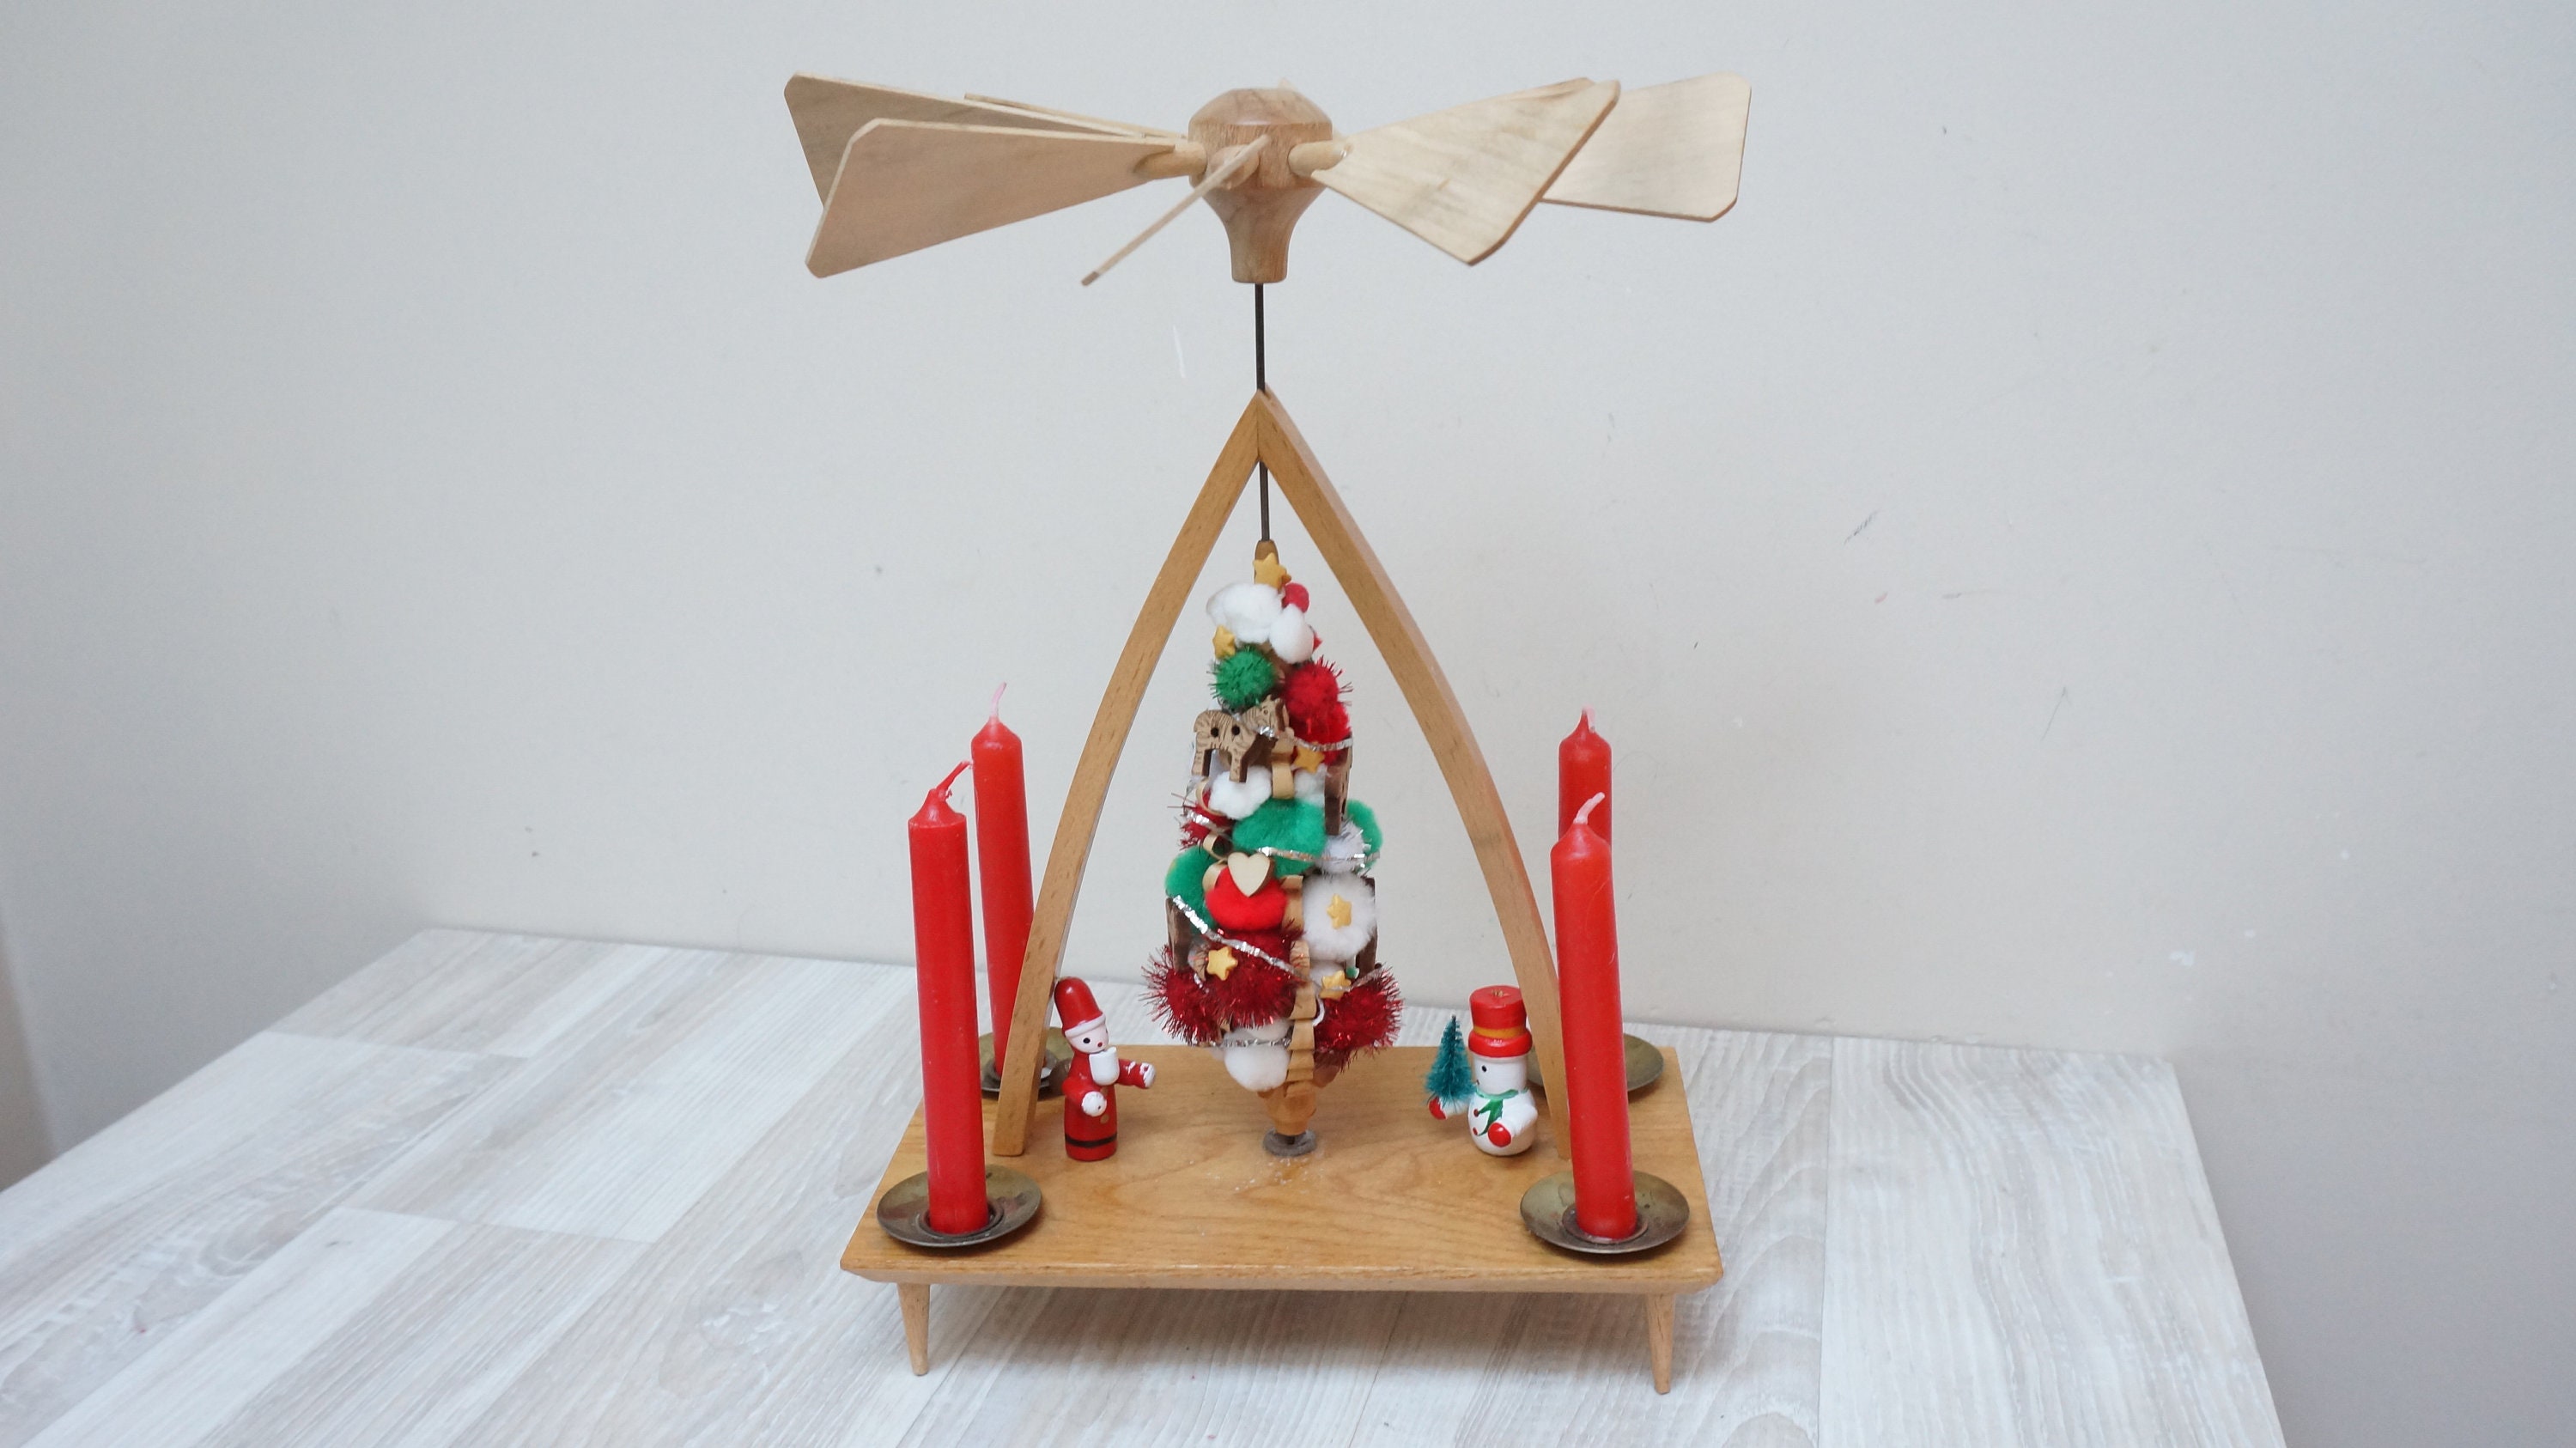 11 Erzgebirge Christmas tree pyramid carousel Santa Snowman candleholder candle holder dolls Vintage wooden Figurine made in Germany 1 tier